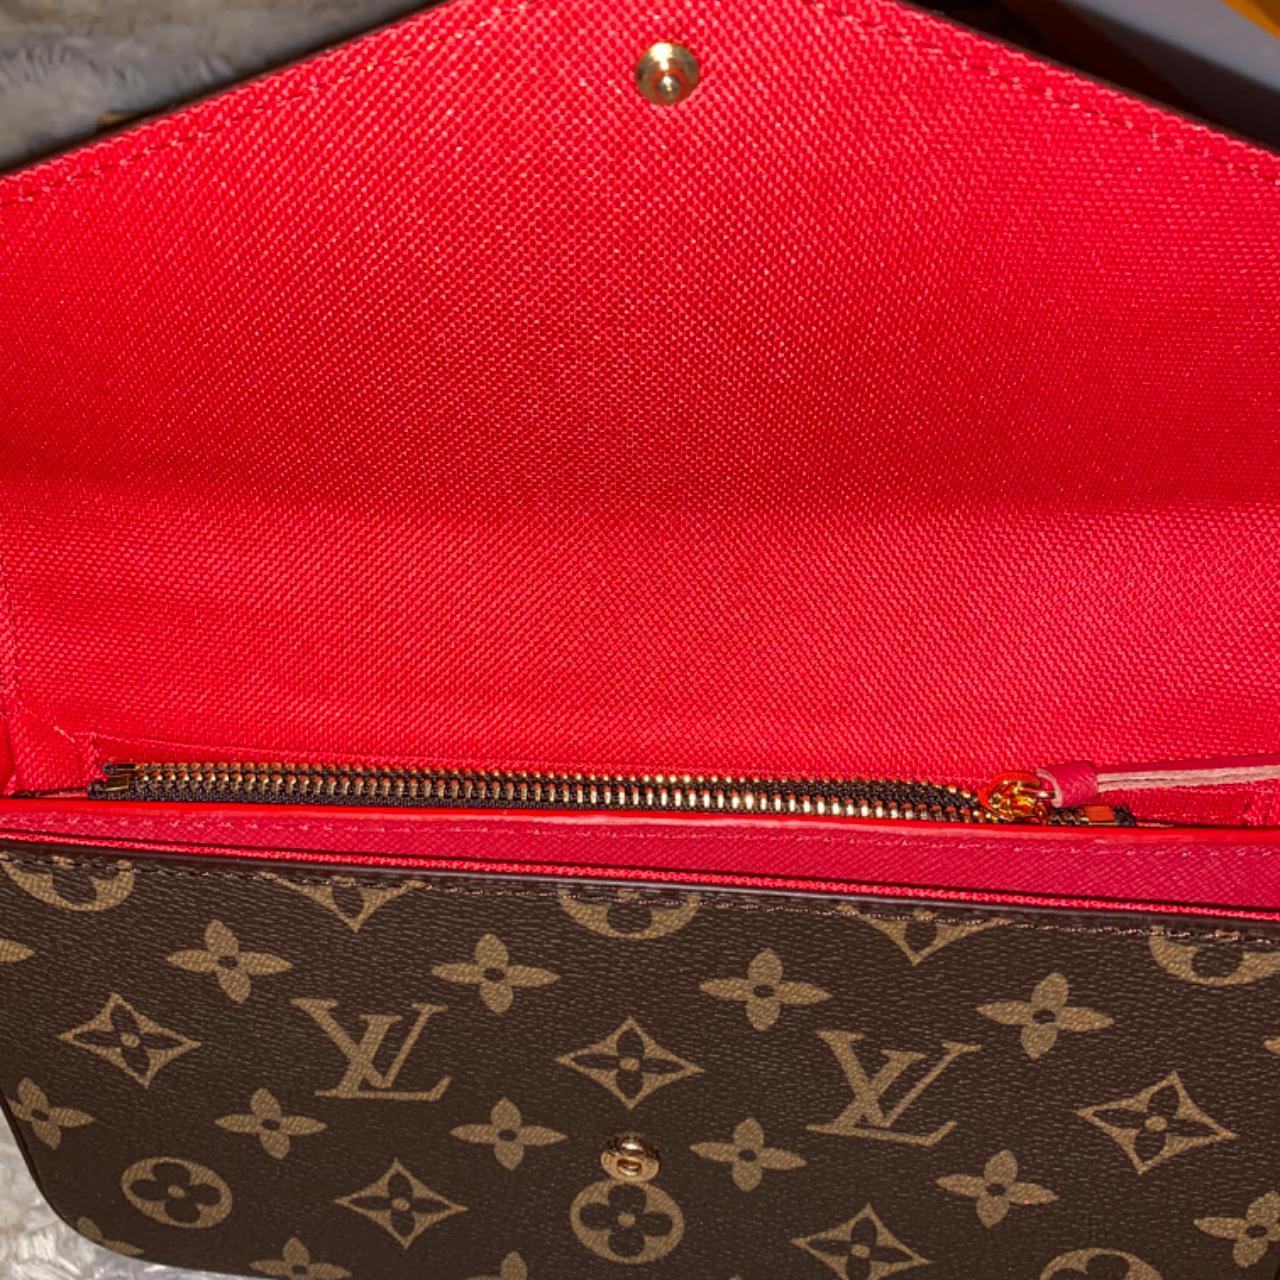 Louis Vuitton neverfull MM epi leather discontinued - Depop